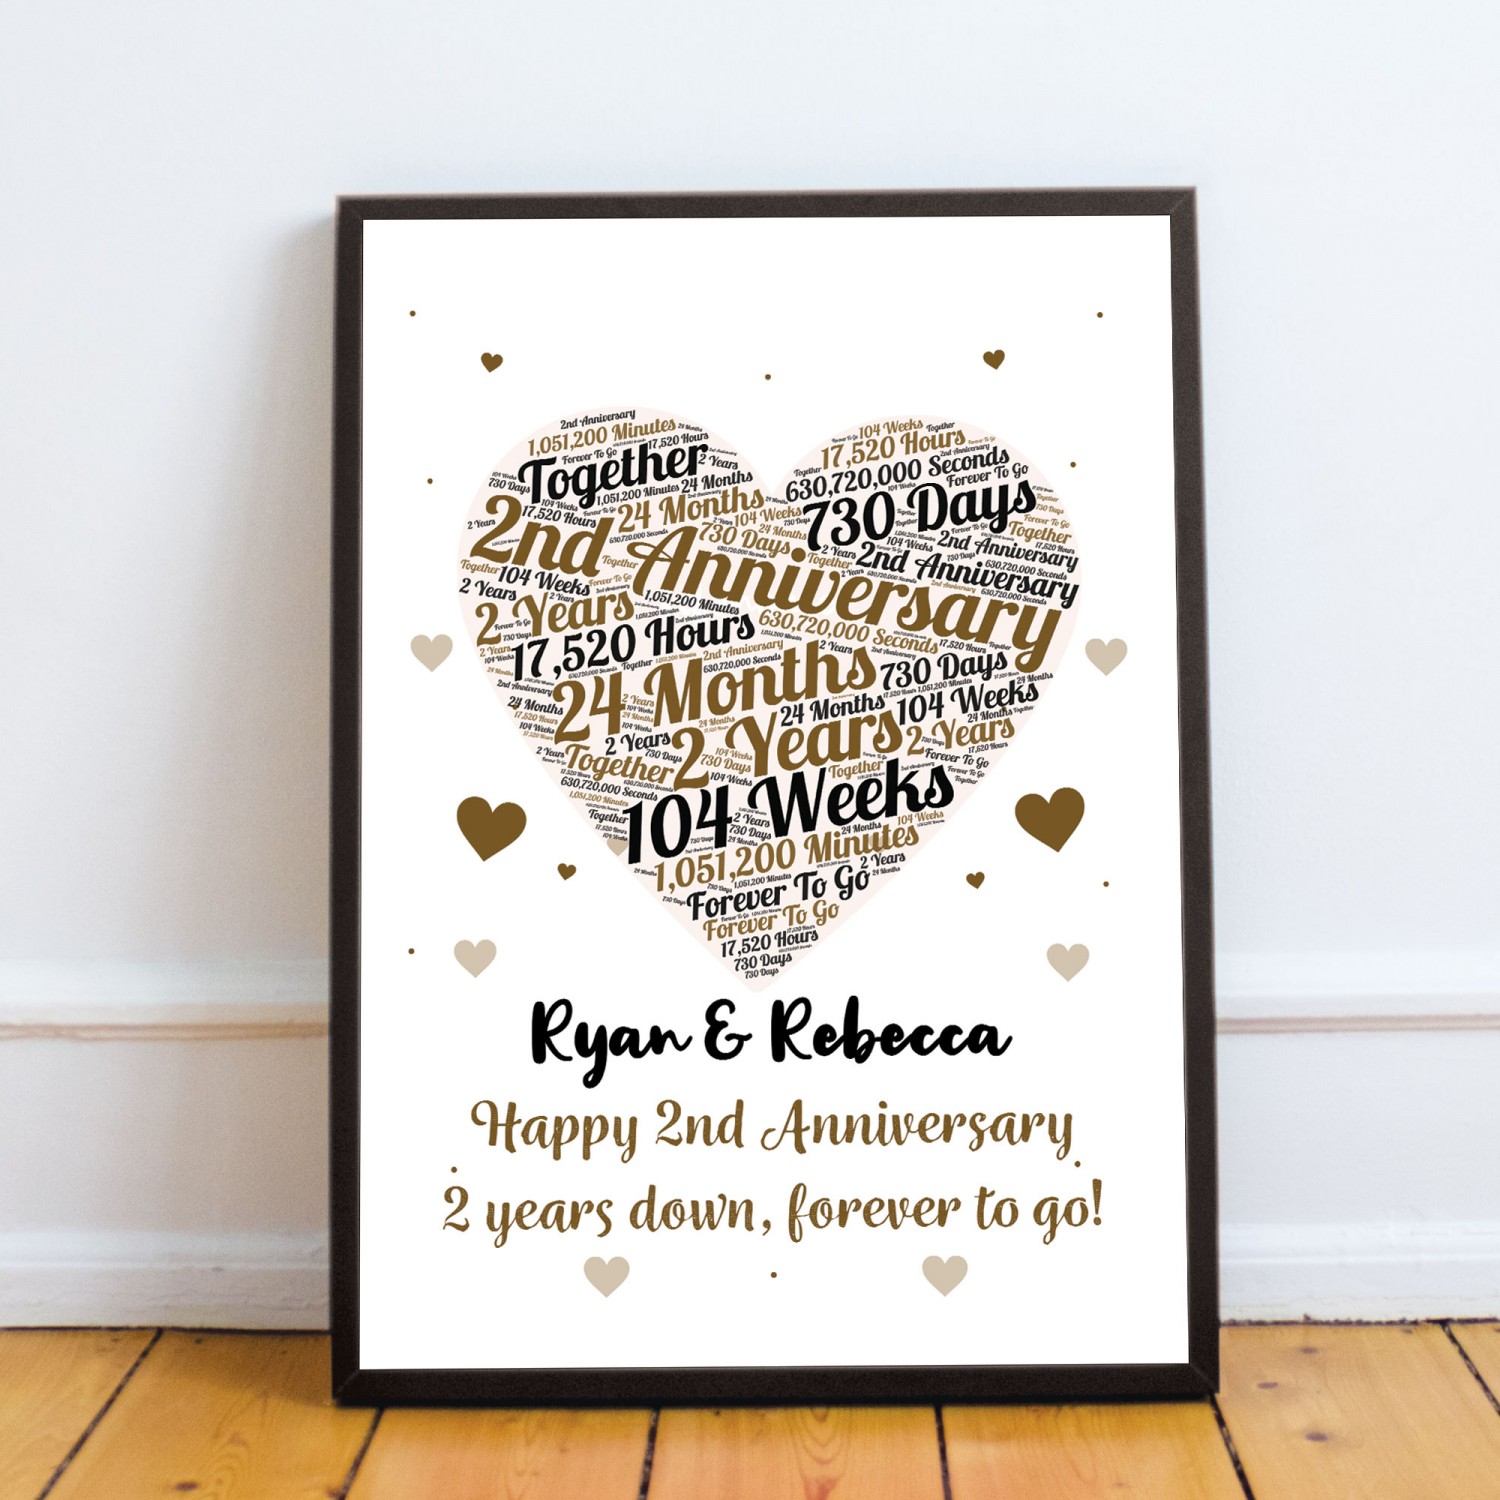 Our Story so Far Timeline Print Anniversary Gift for Husband Anniversary  Gift for Wife 50th Anniversary Gift for Parents - Etsy | Cotton anniversary  gifts, 2 year anniversary gift, Anniversary gifts for husband